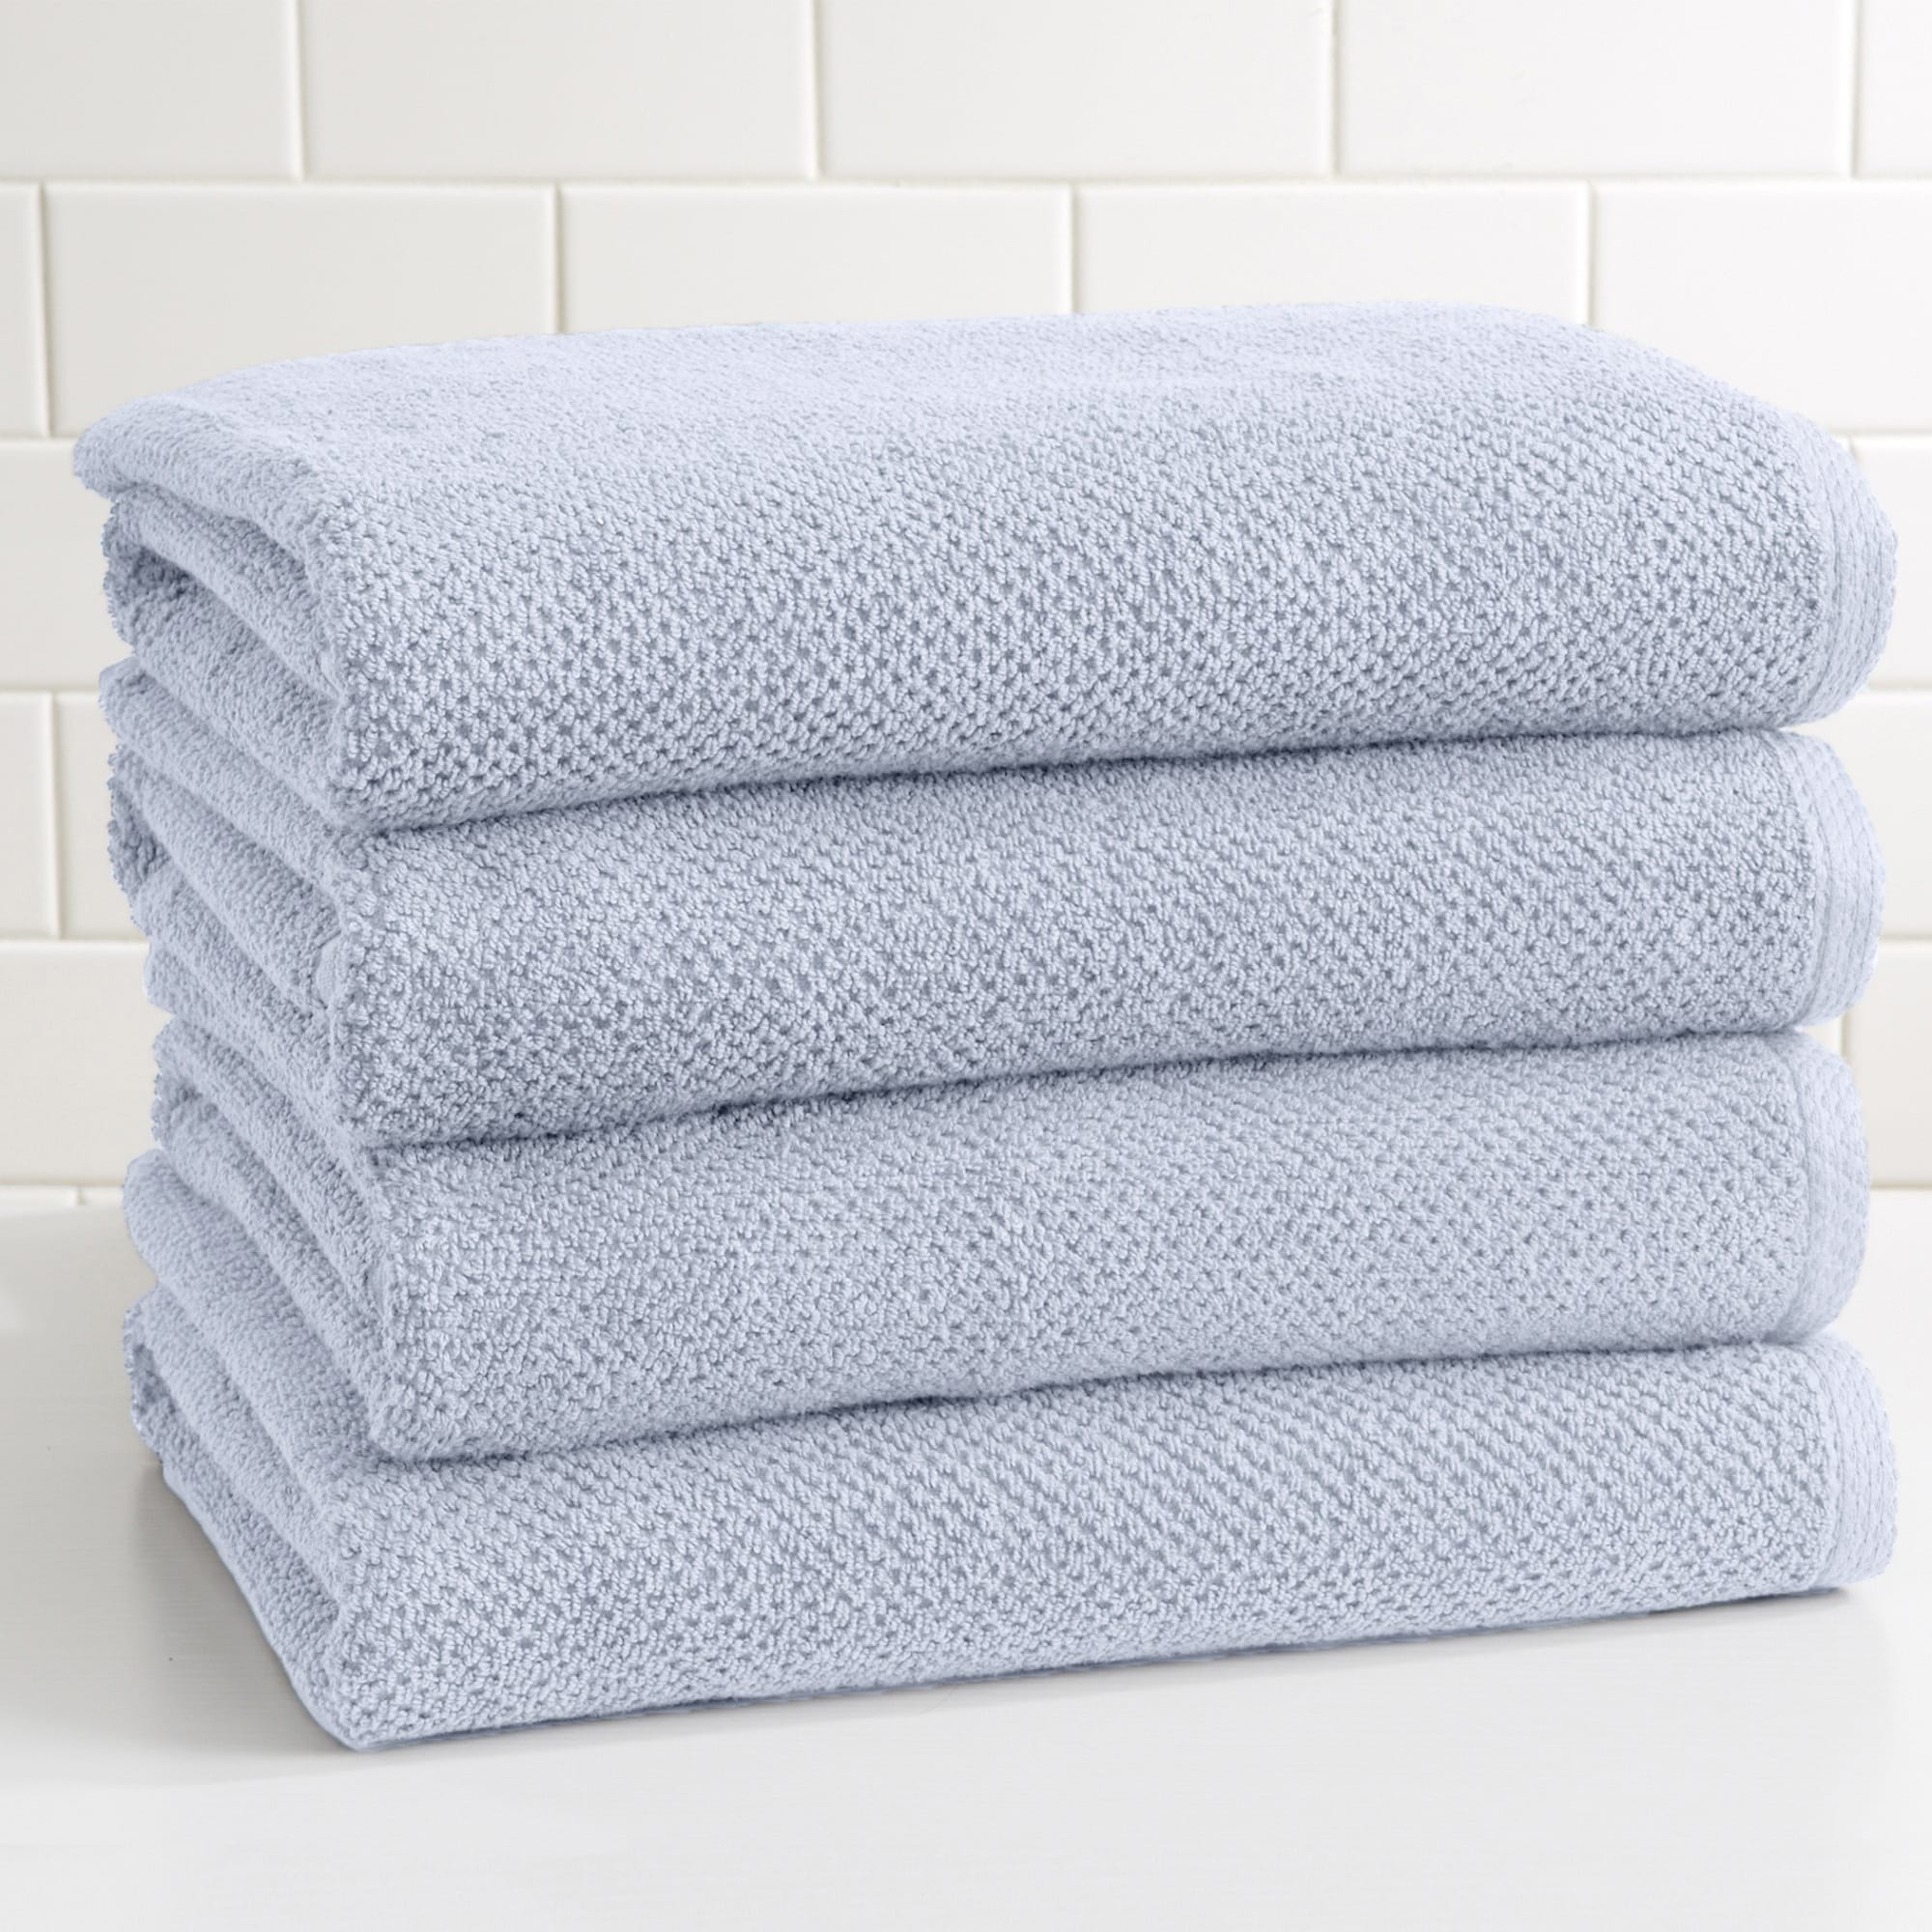 Tens Towels Luxe, 4 PC Mint XL 30x60 Inches Popcorn Textured Bath Towels  Extra Large, 100% Cotton, Absorbent and Quick Dry, Ultimate Luxury Towels  for